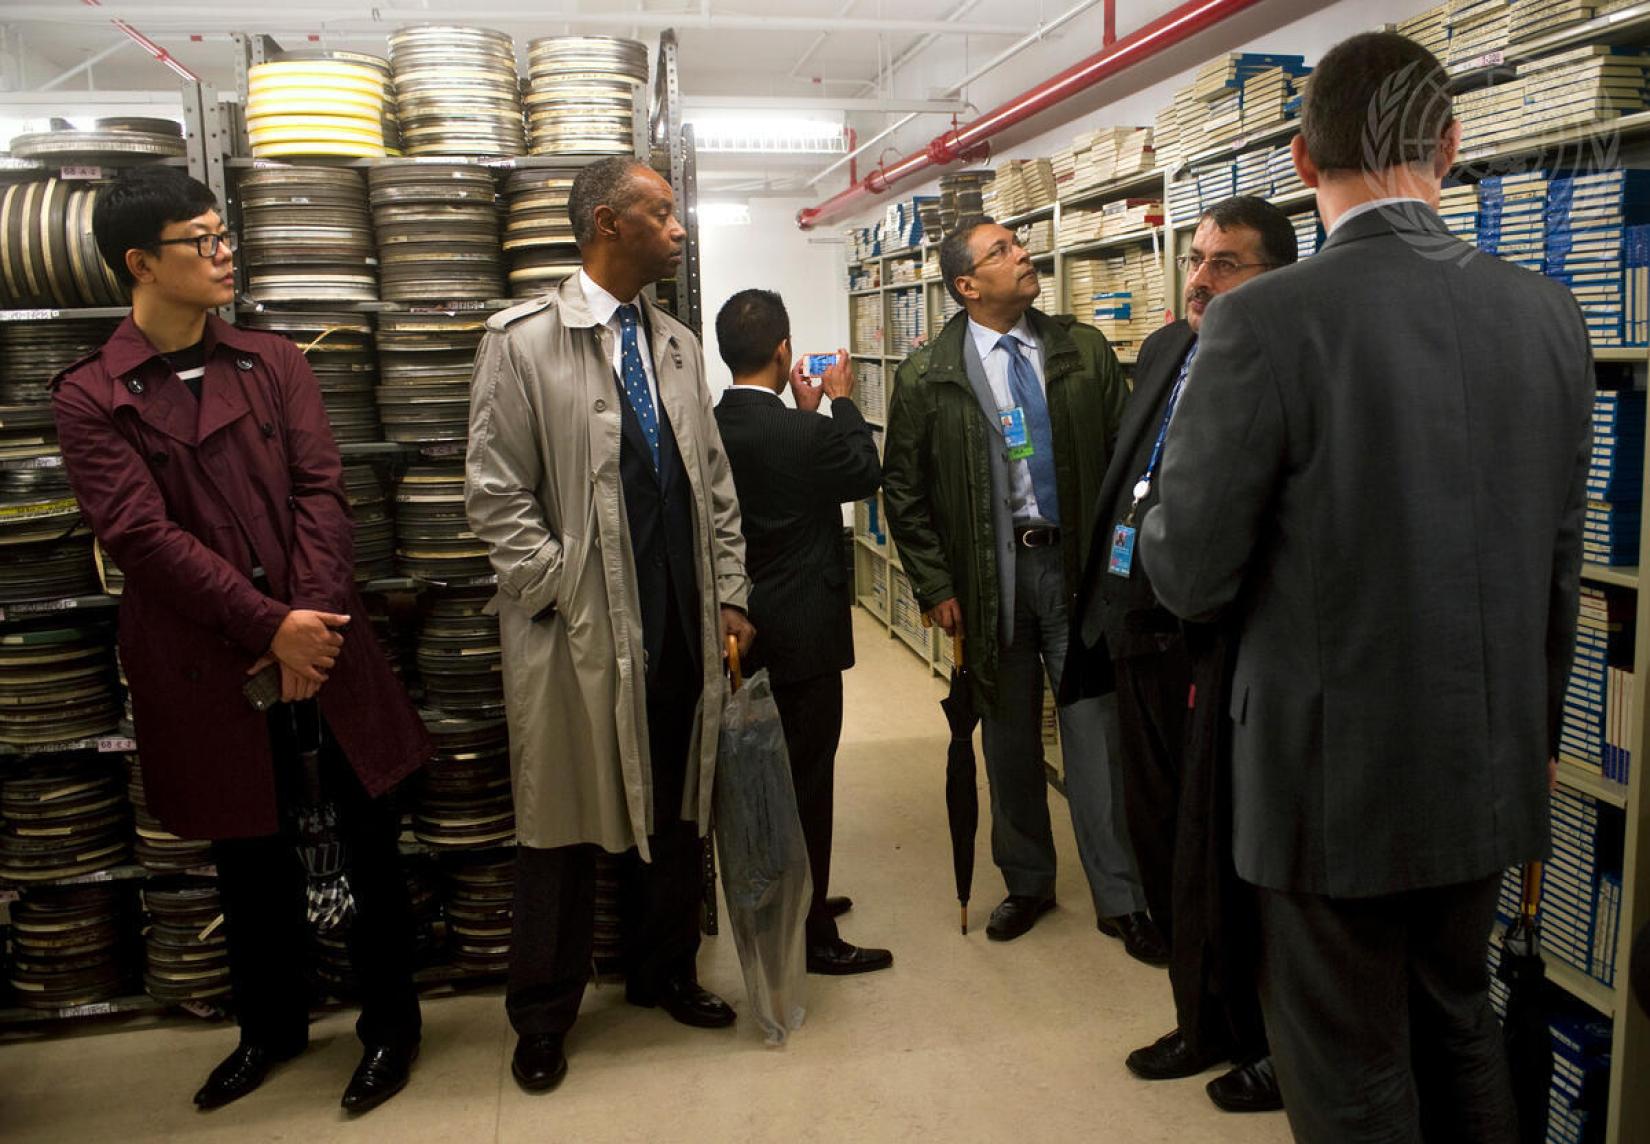 UN staff members and delegates on a tour of the Department of Public Information (DPI) audiovisual archives at UN Headquarters.